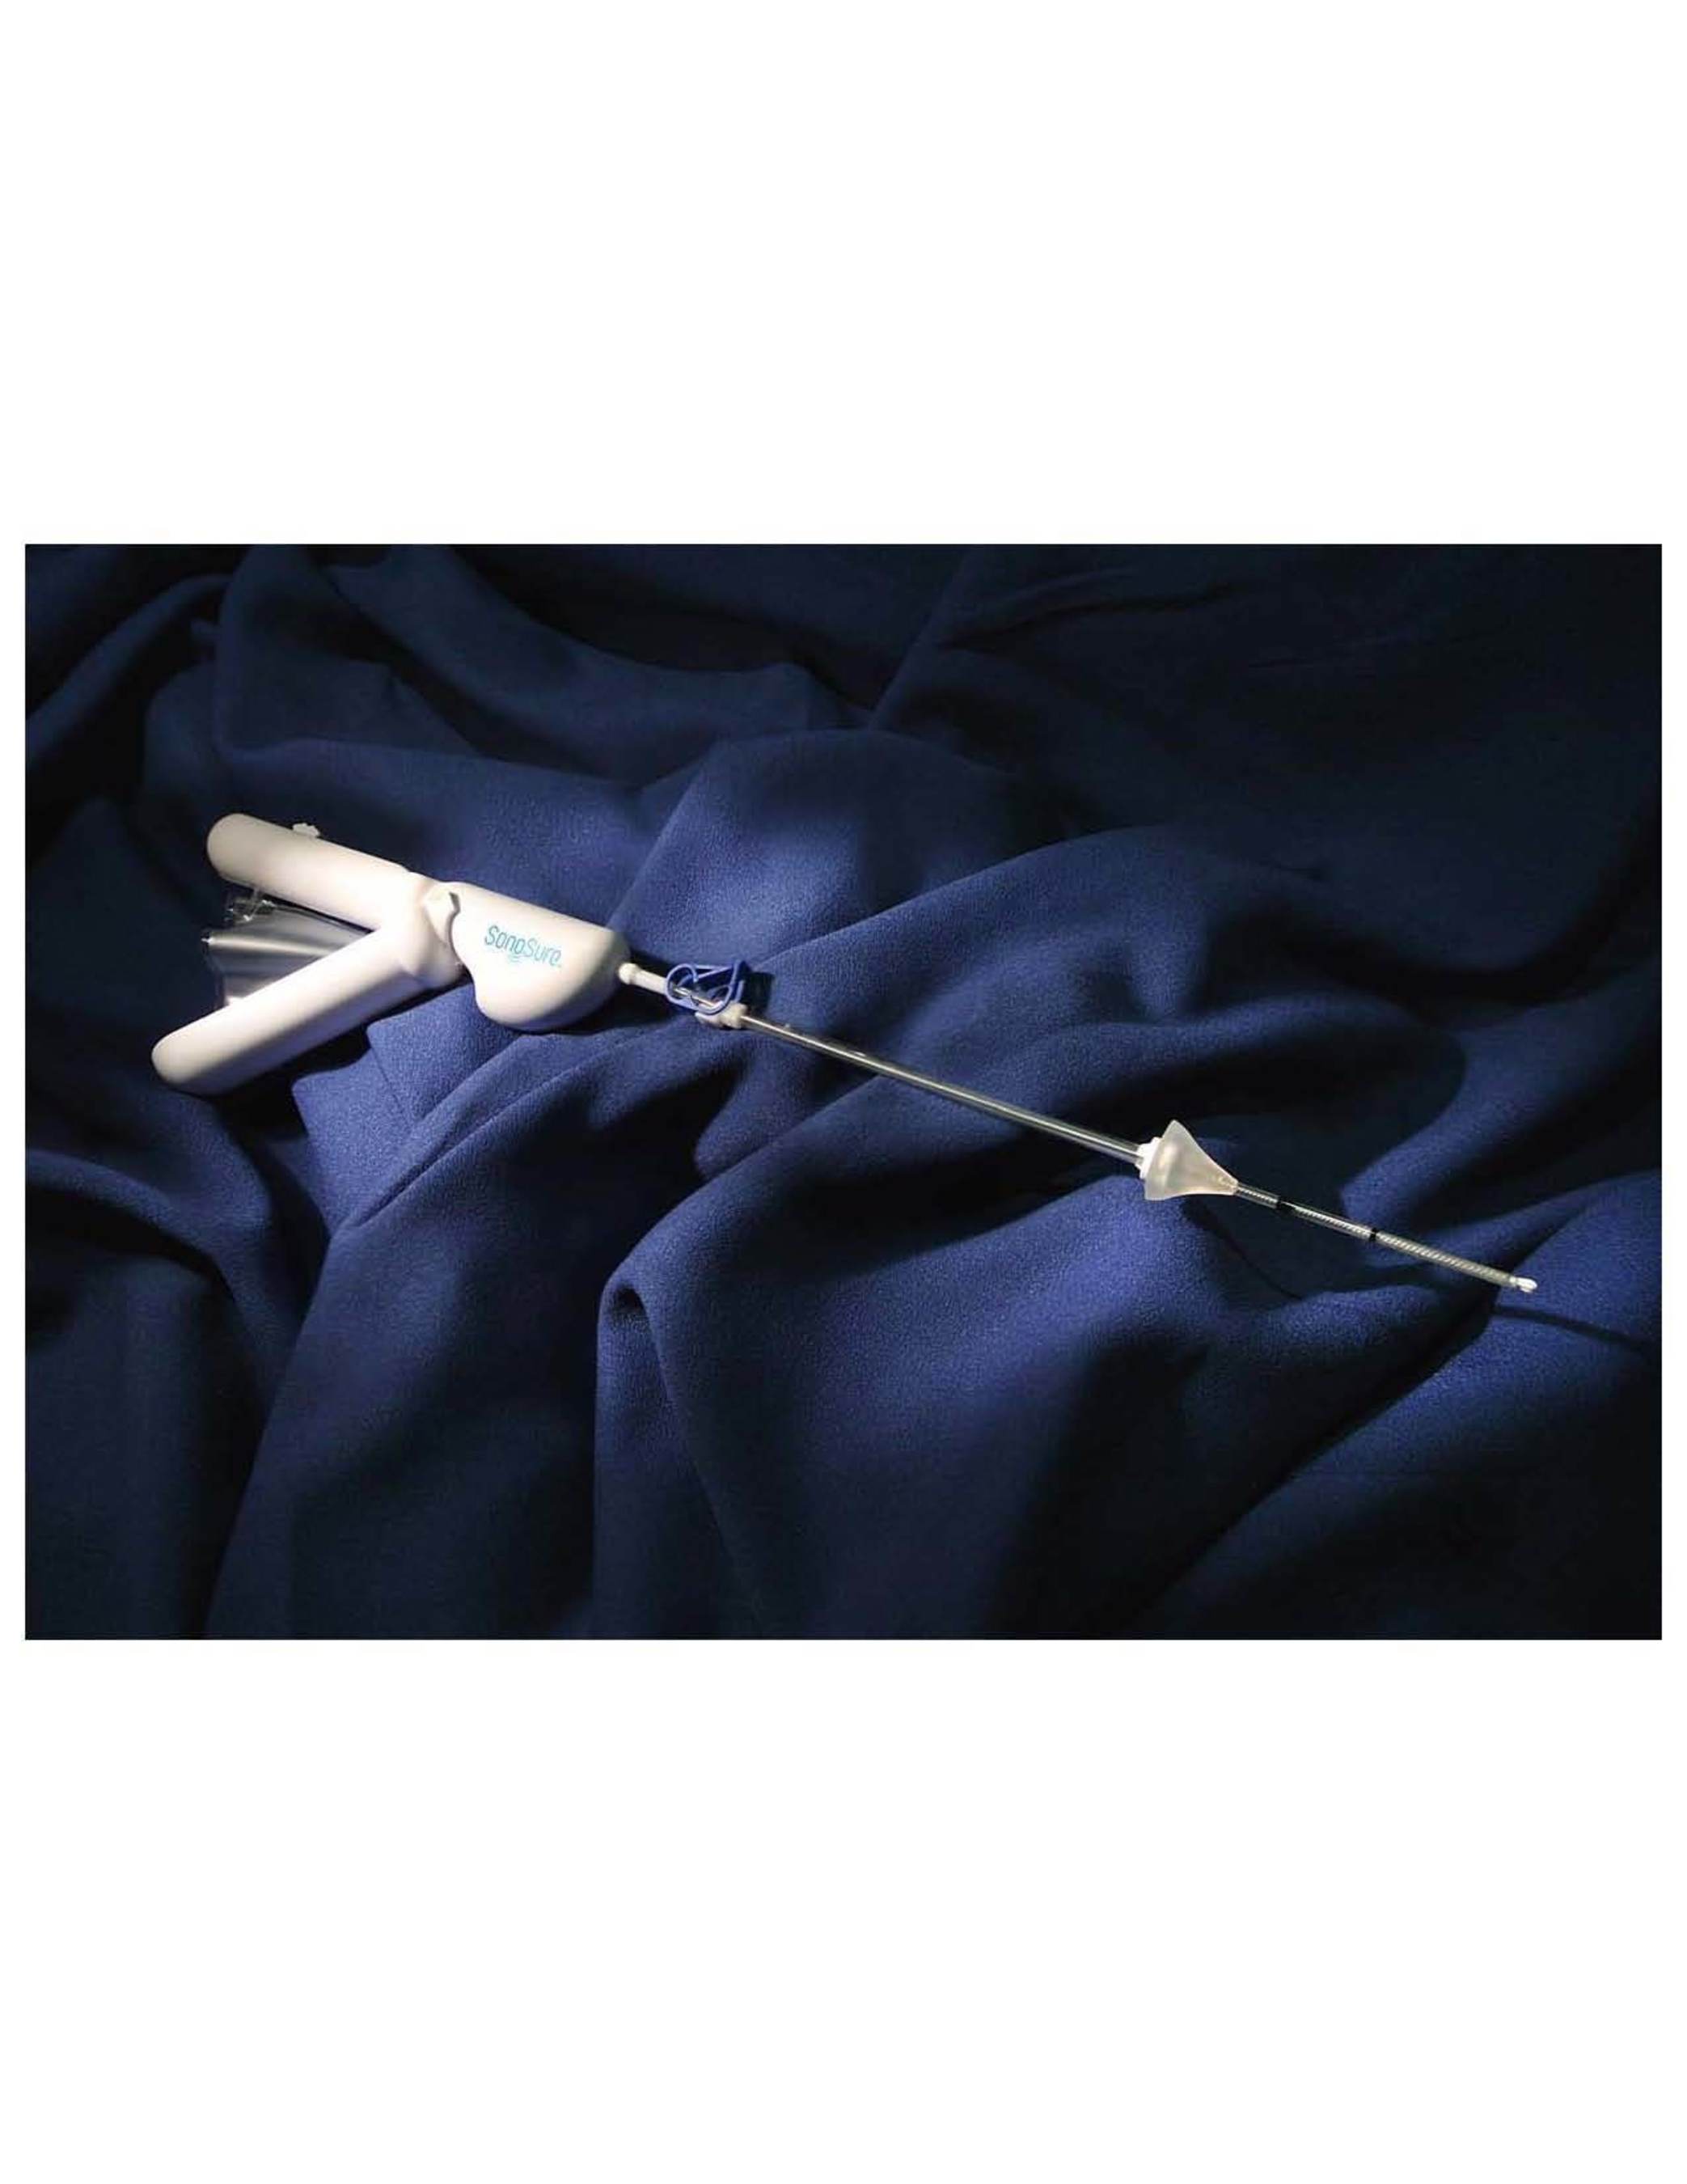 CrossBay Medical Inc.'s SonoSure device is indicated for use to access the uterine cavity for saline infusion sonohysterography and to obtain endometrial biopsy, if indicated, utilizing the same device.  (PRNewsFoto/Norgenix Pharmaceuticals, LLC)